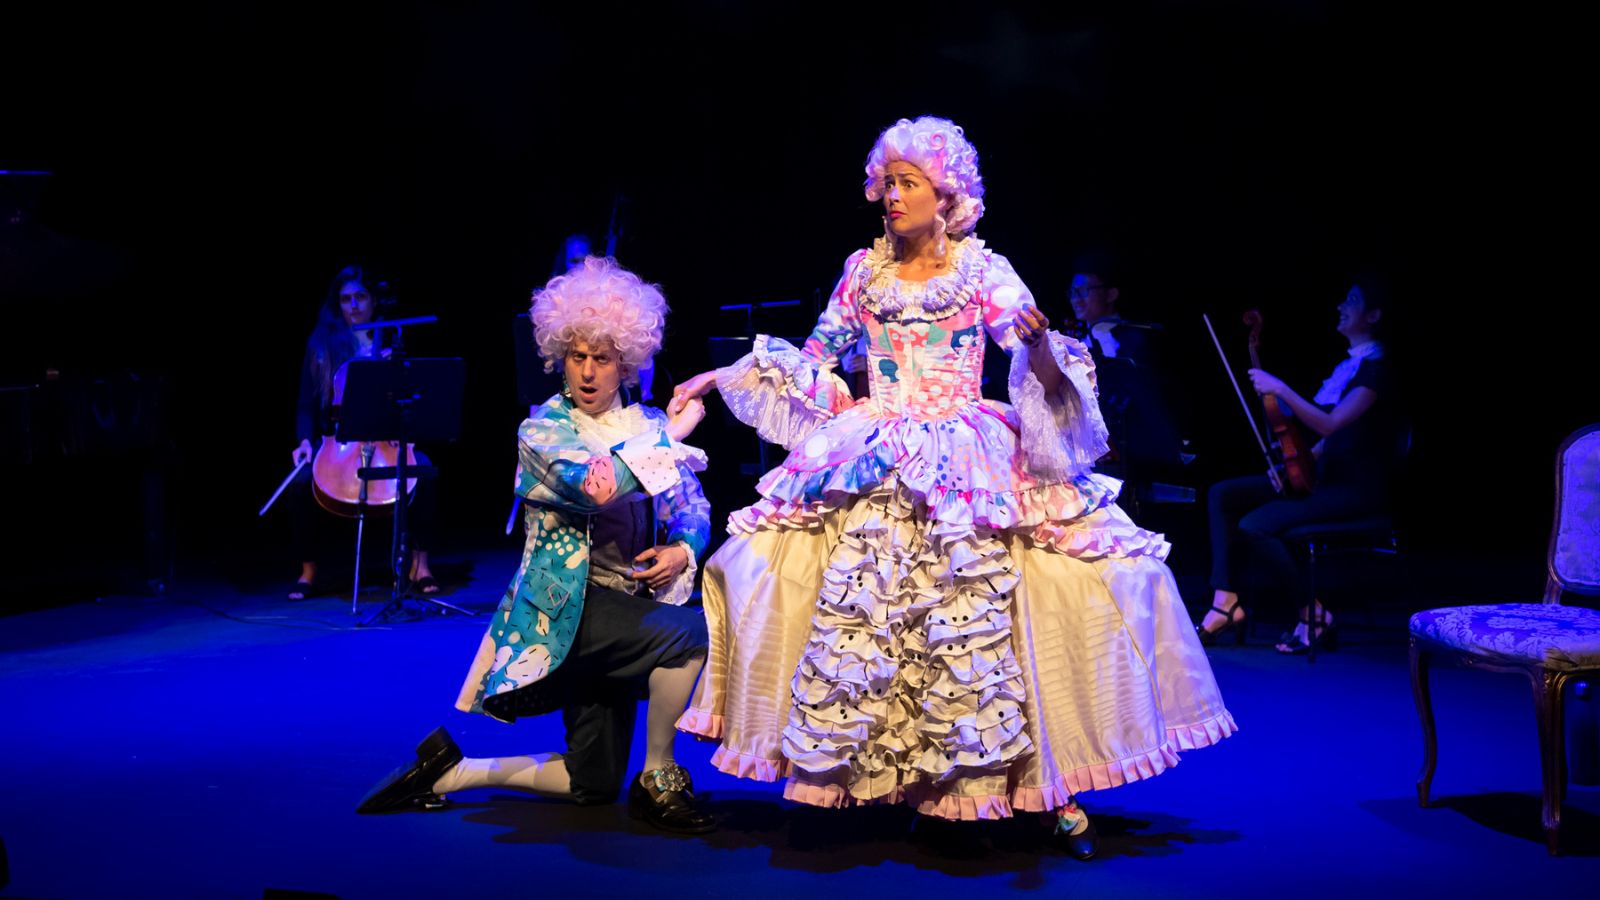 A man and woman dressed up as Mozart and his wife in colourful outfits and big white wigs